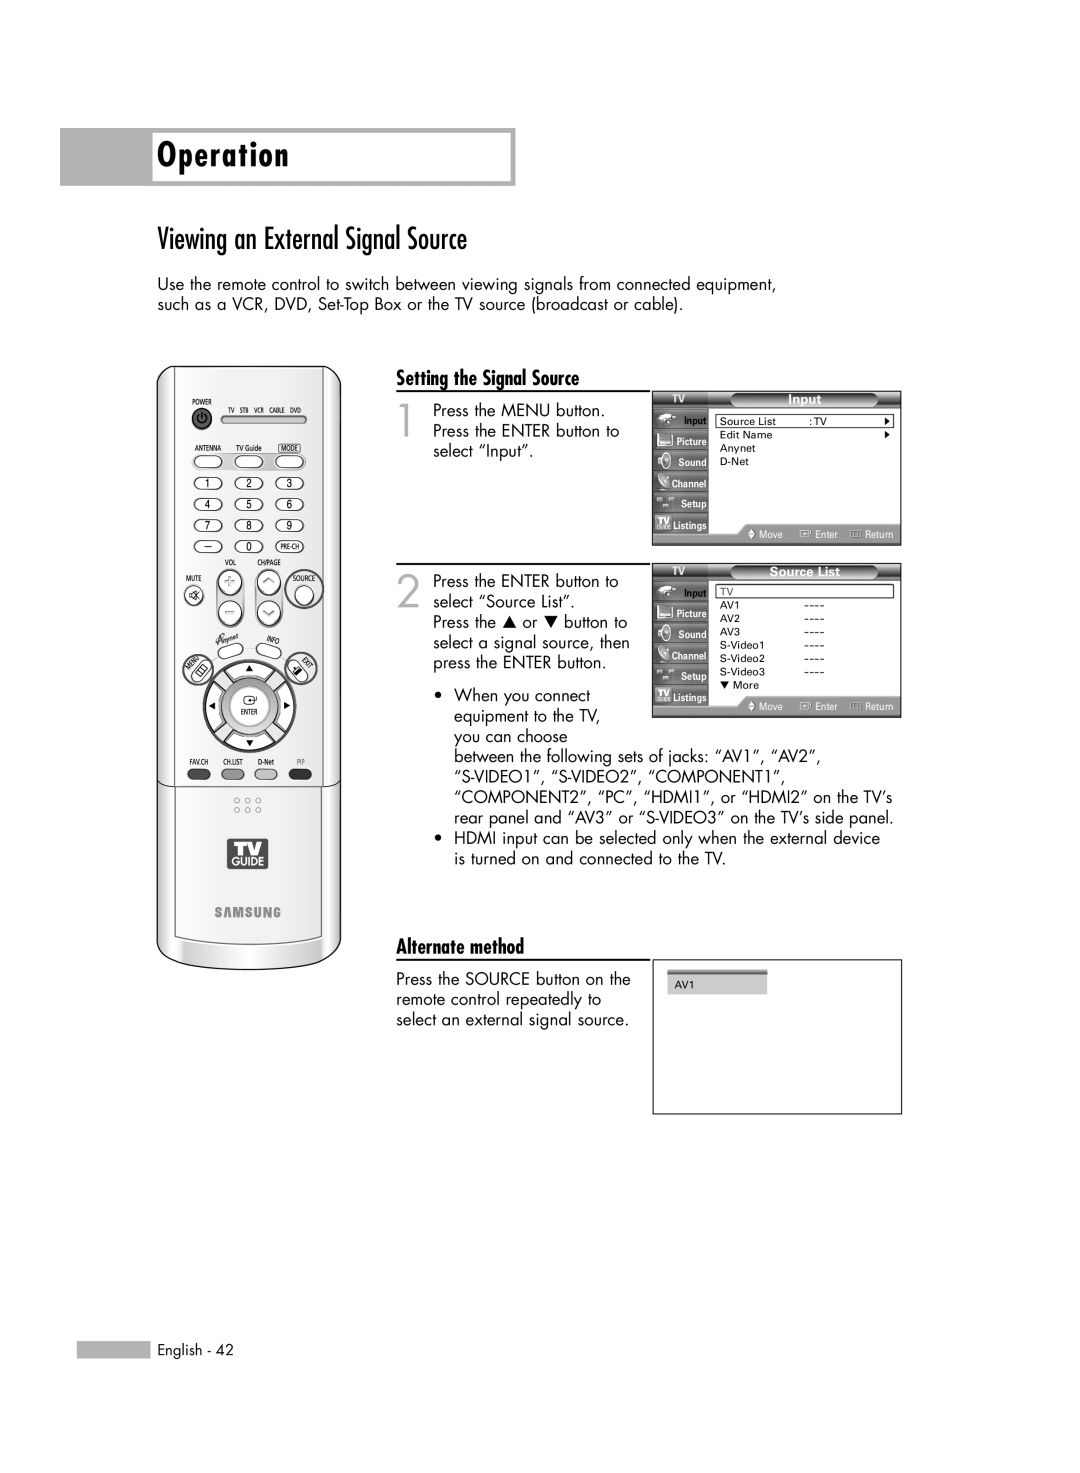 Samsung HL-R6178W, HL-R5678W Viewing an External Signal Source, Operation, Setting the Signal Source, Alternate method 